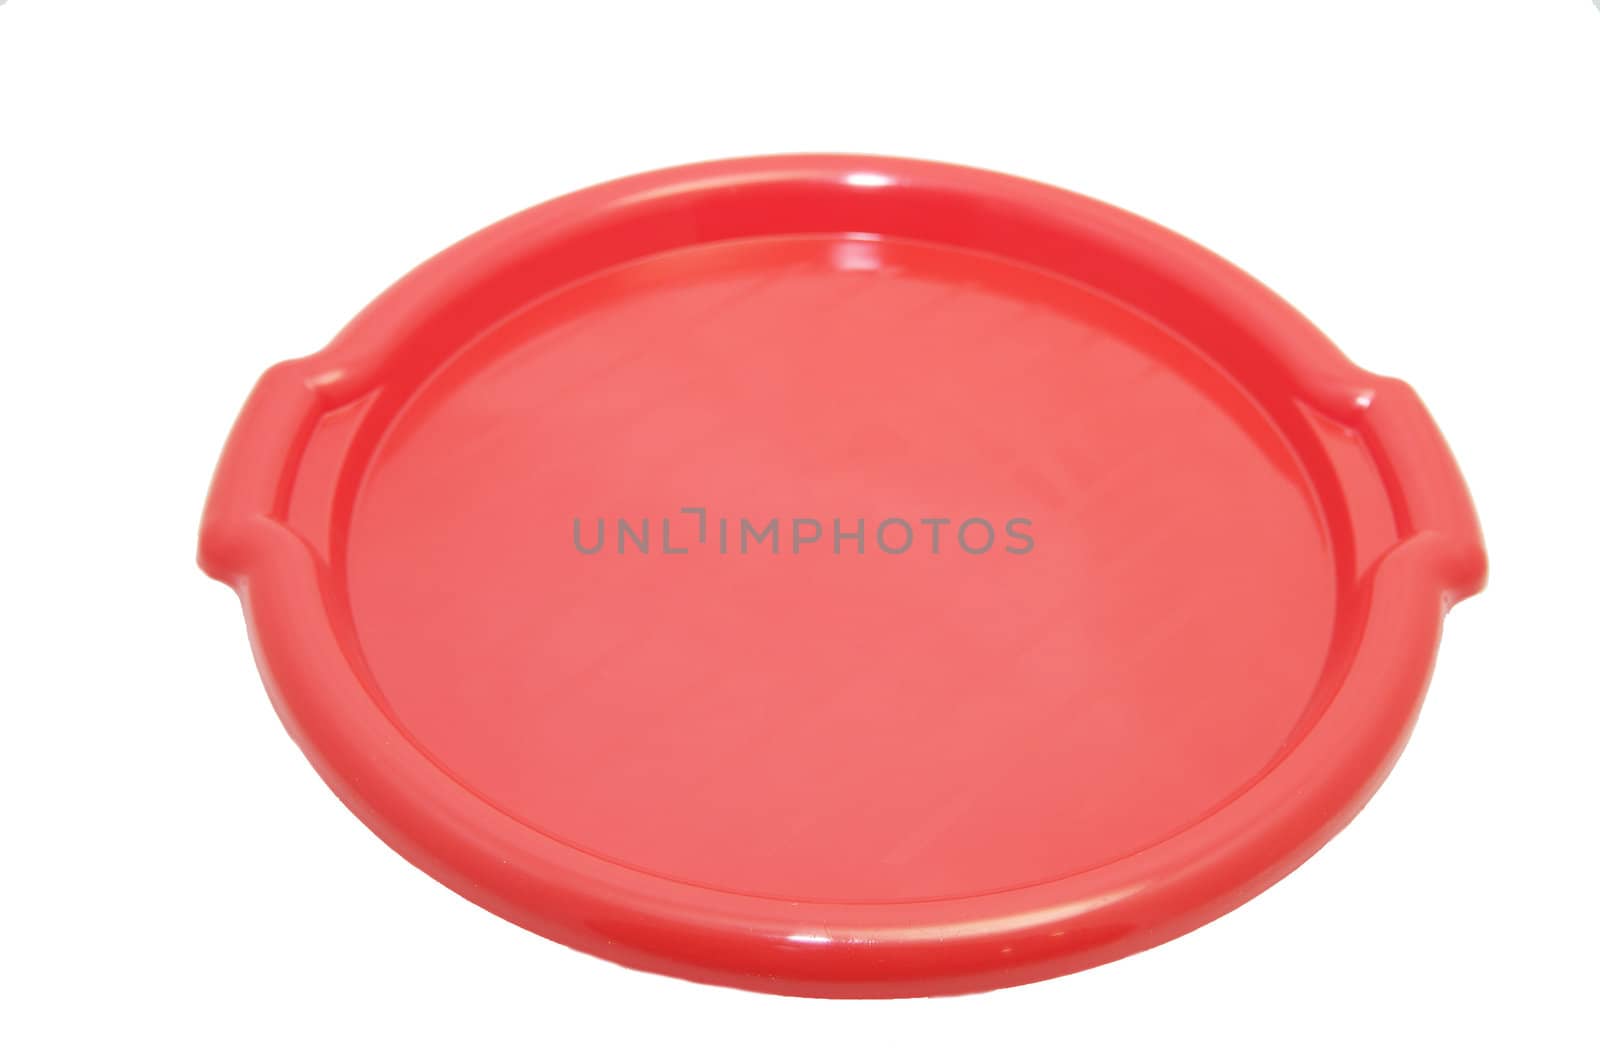 Round red plastic tray on a white background